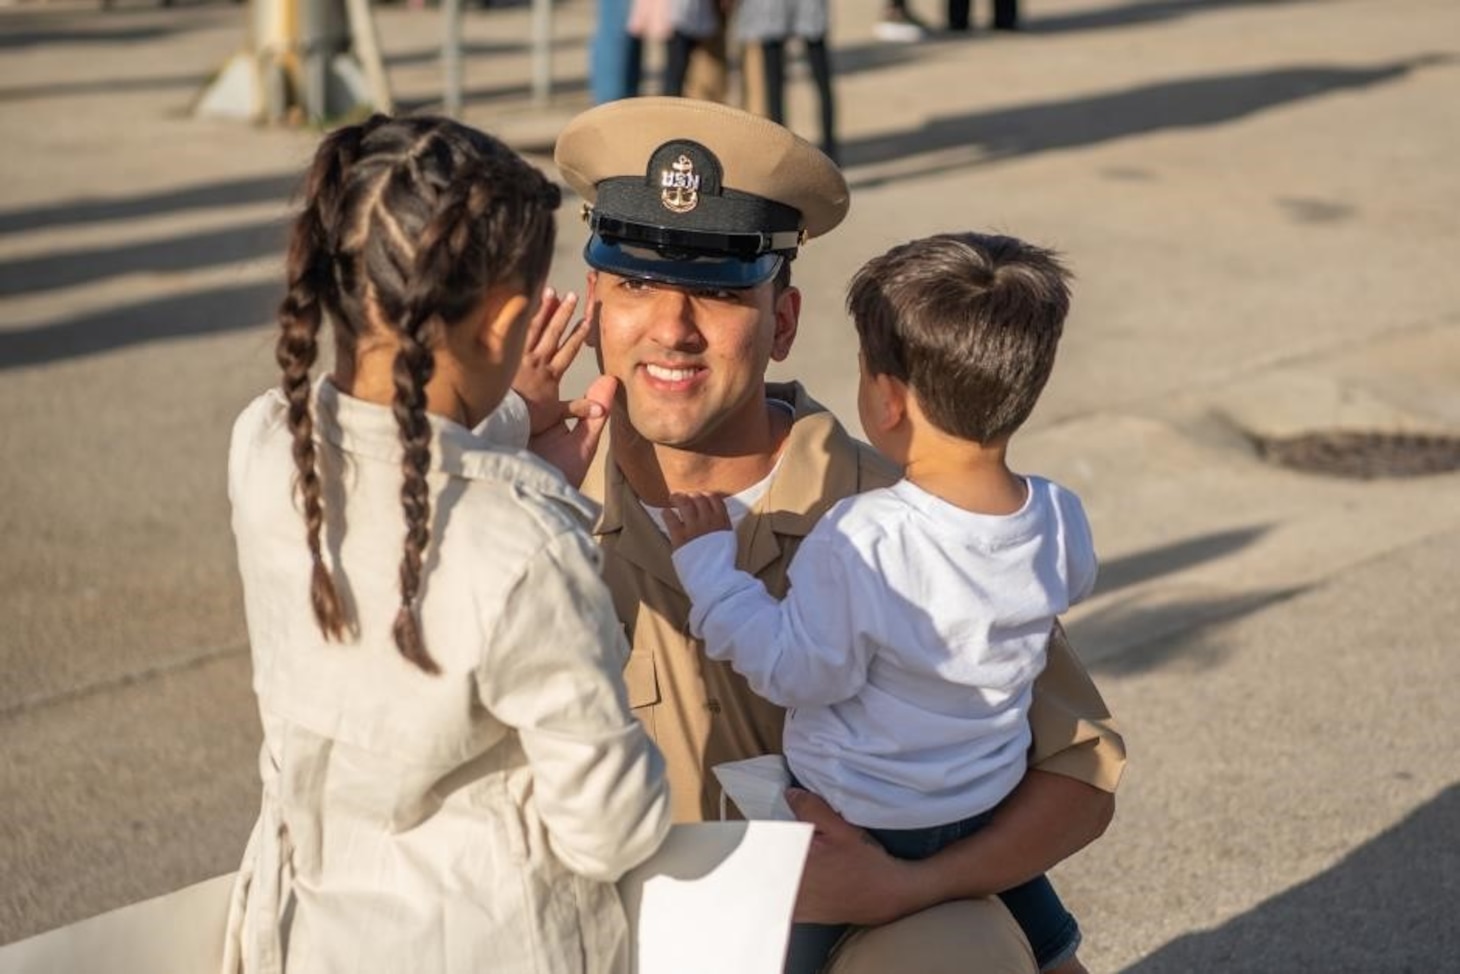 211210-N-RY670-1469 
NAVAL STATION ROTA, Spain (Dec. 10, 2021) Sailors reunite with their families after the Arleigh Burke-class guided-missile destroyer USS Porter (DDG 78) returns to Naval Station (NAVSTA) Rota, Spain, Dec. 10, 2021. Porter concluded its 10th patrol in the U.S. Sixth Fleet area of operations in support of U.S. national security interests in Europe and Africa. (U.S. Navy photo by Mass Communication Specialist 2nd Class Jacob Owen)